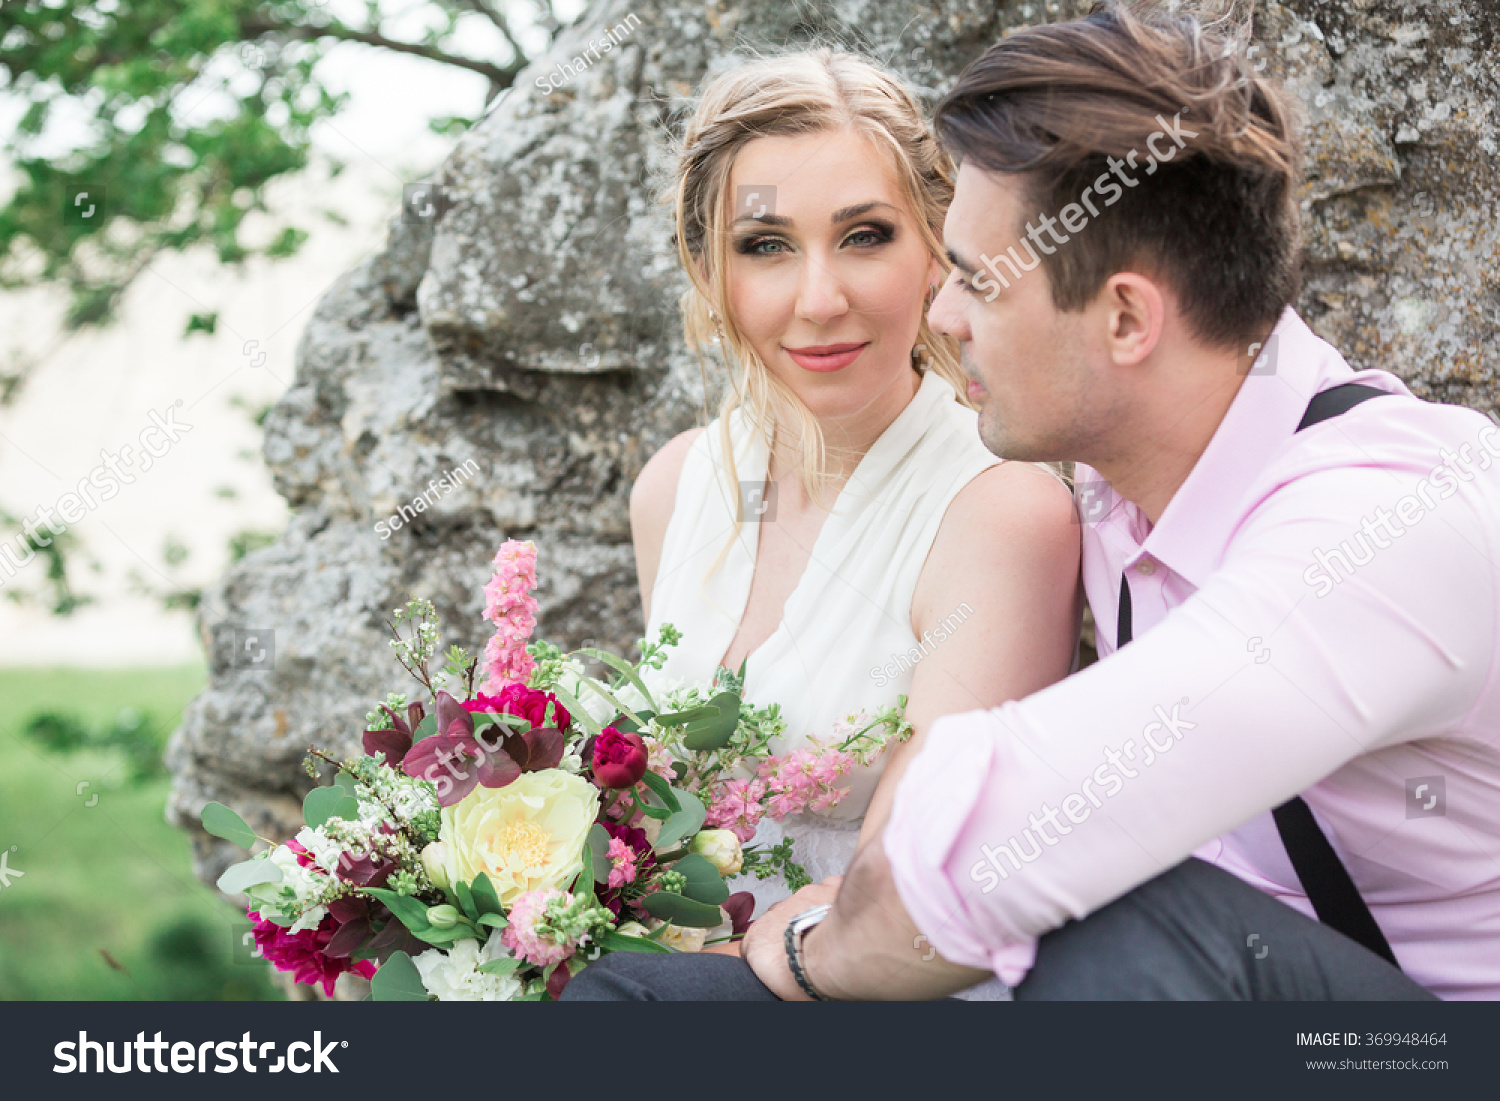 Portrait of the bride and groom outdoors #369948464